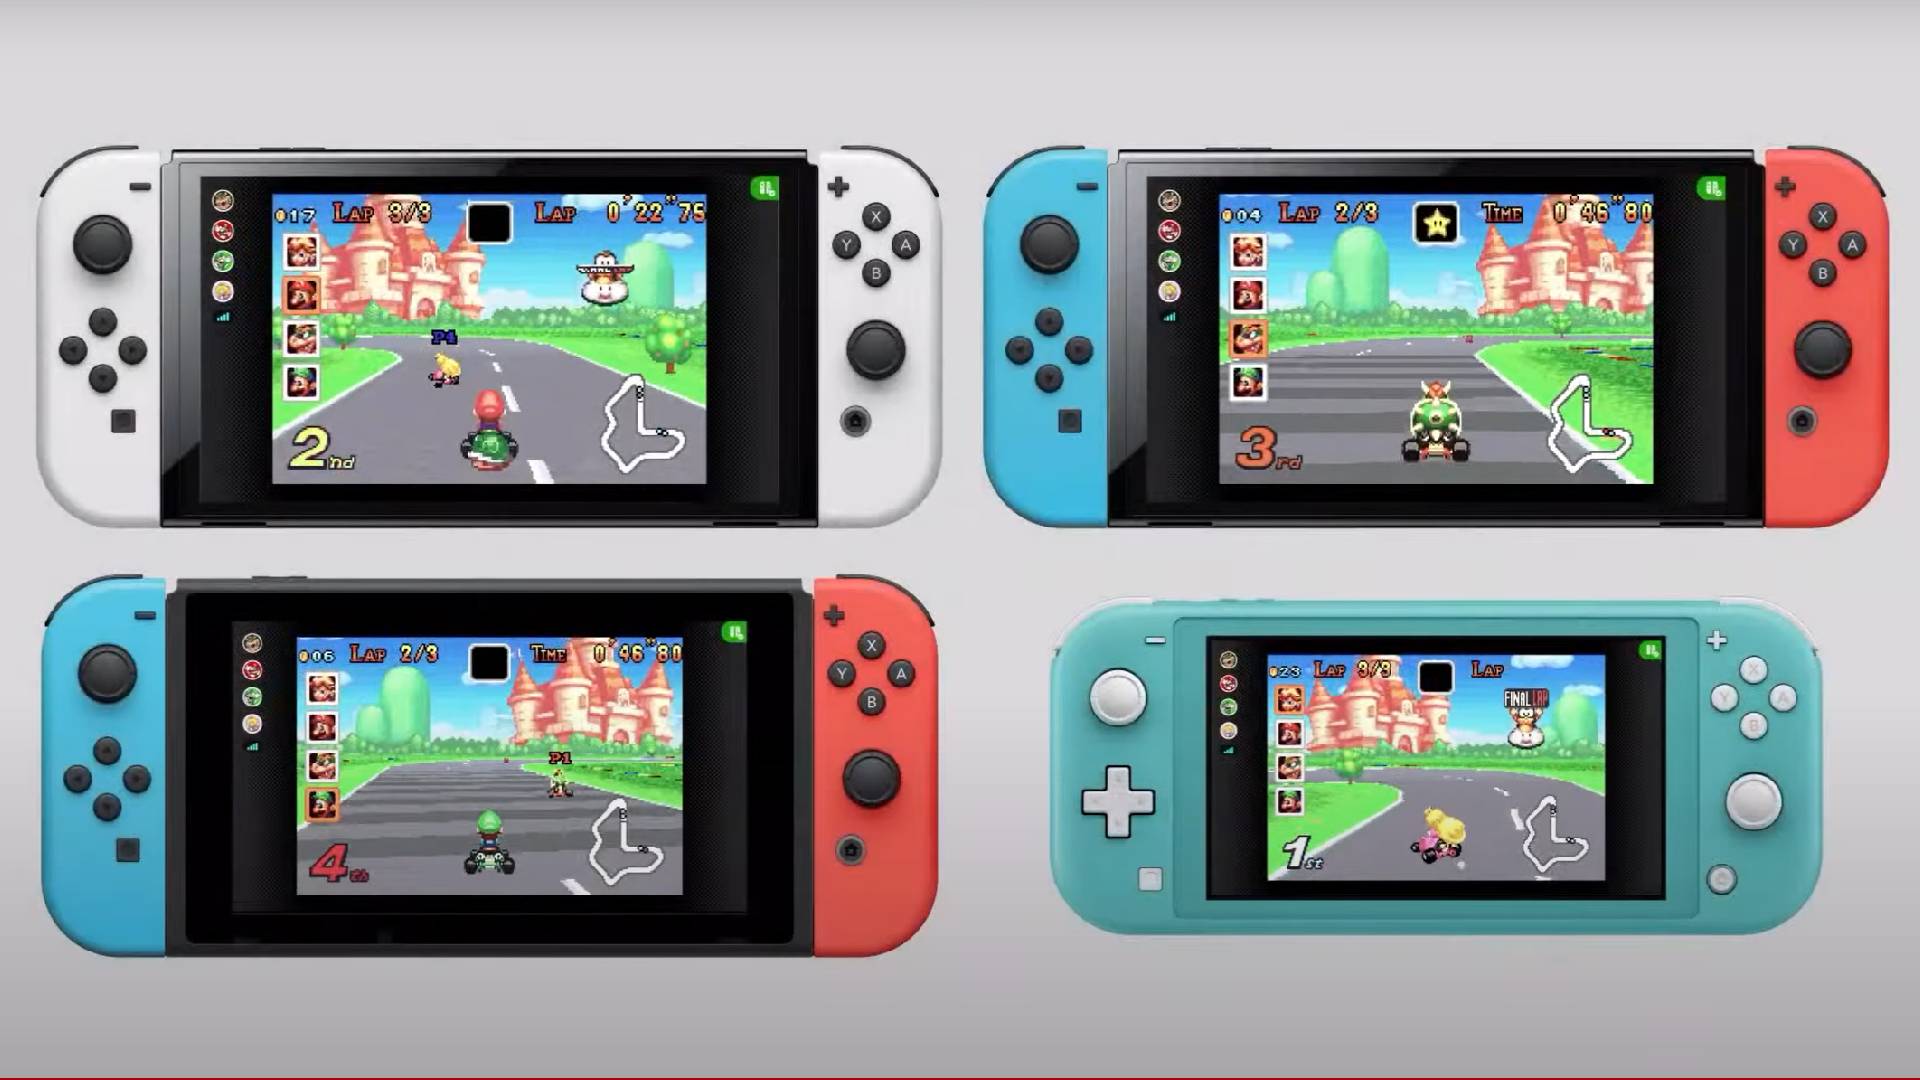 Game Boy Advance Games Coming To Switch Online, Leak Suggests